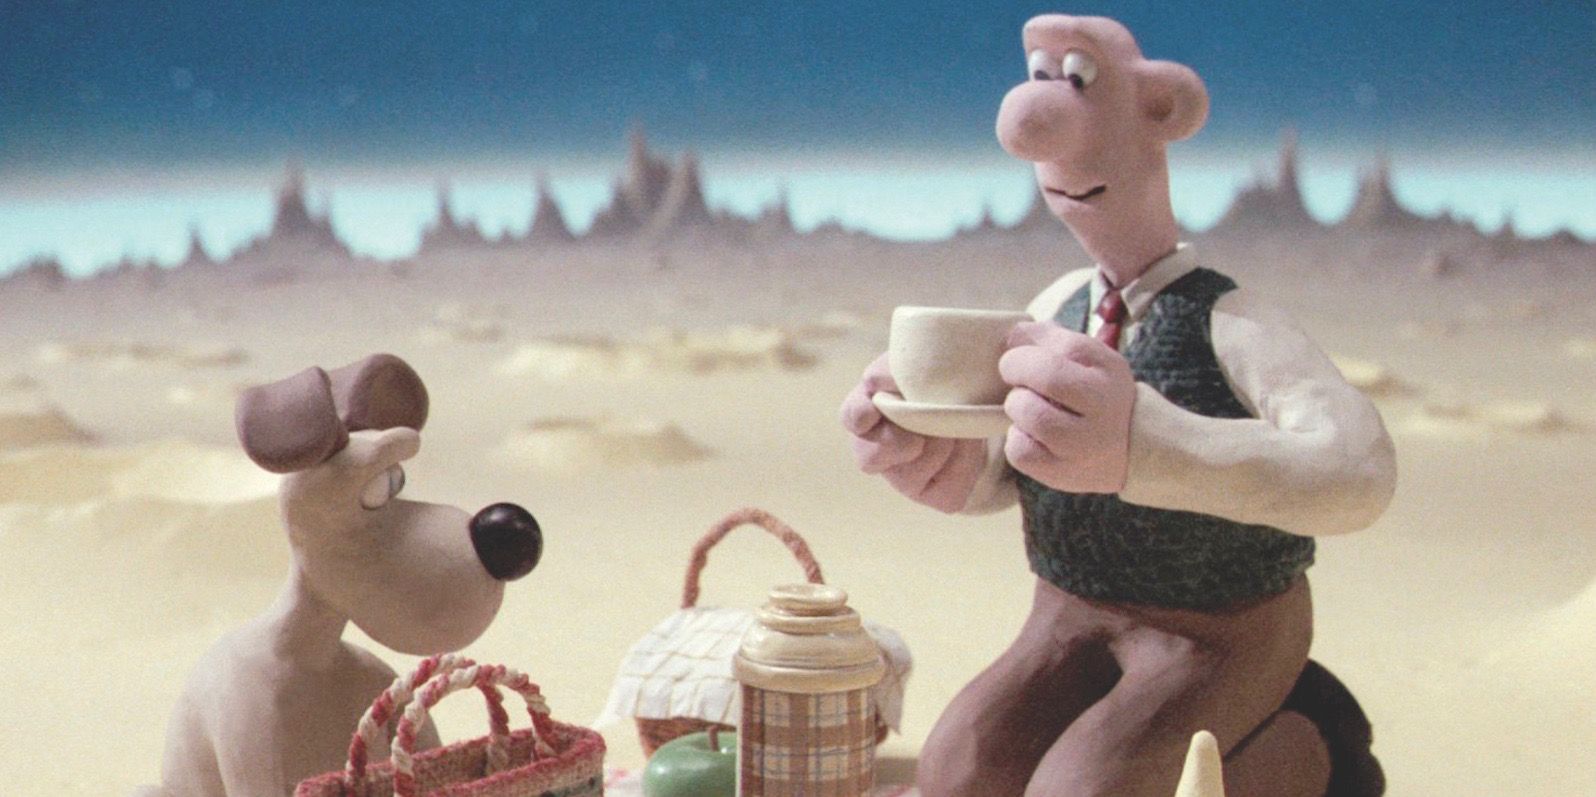 Wallace and Gromit on the Moon in A Grand Day Out